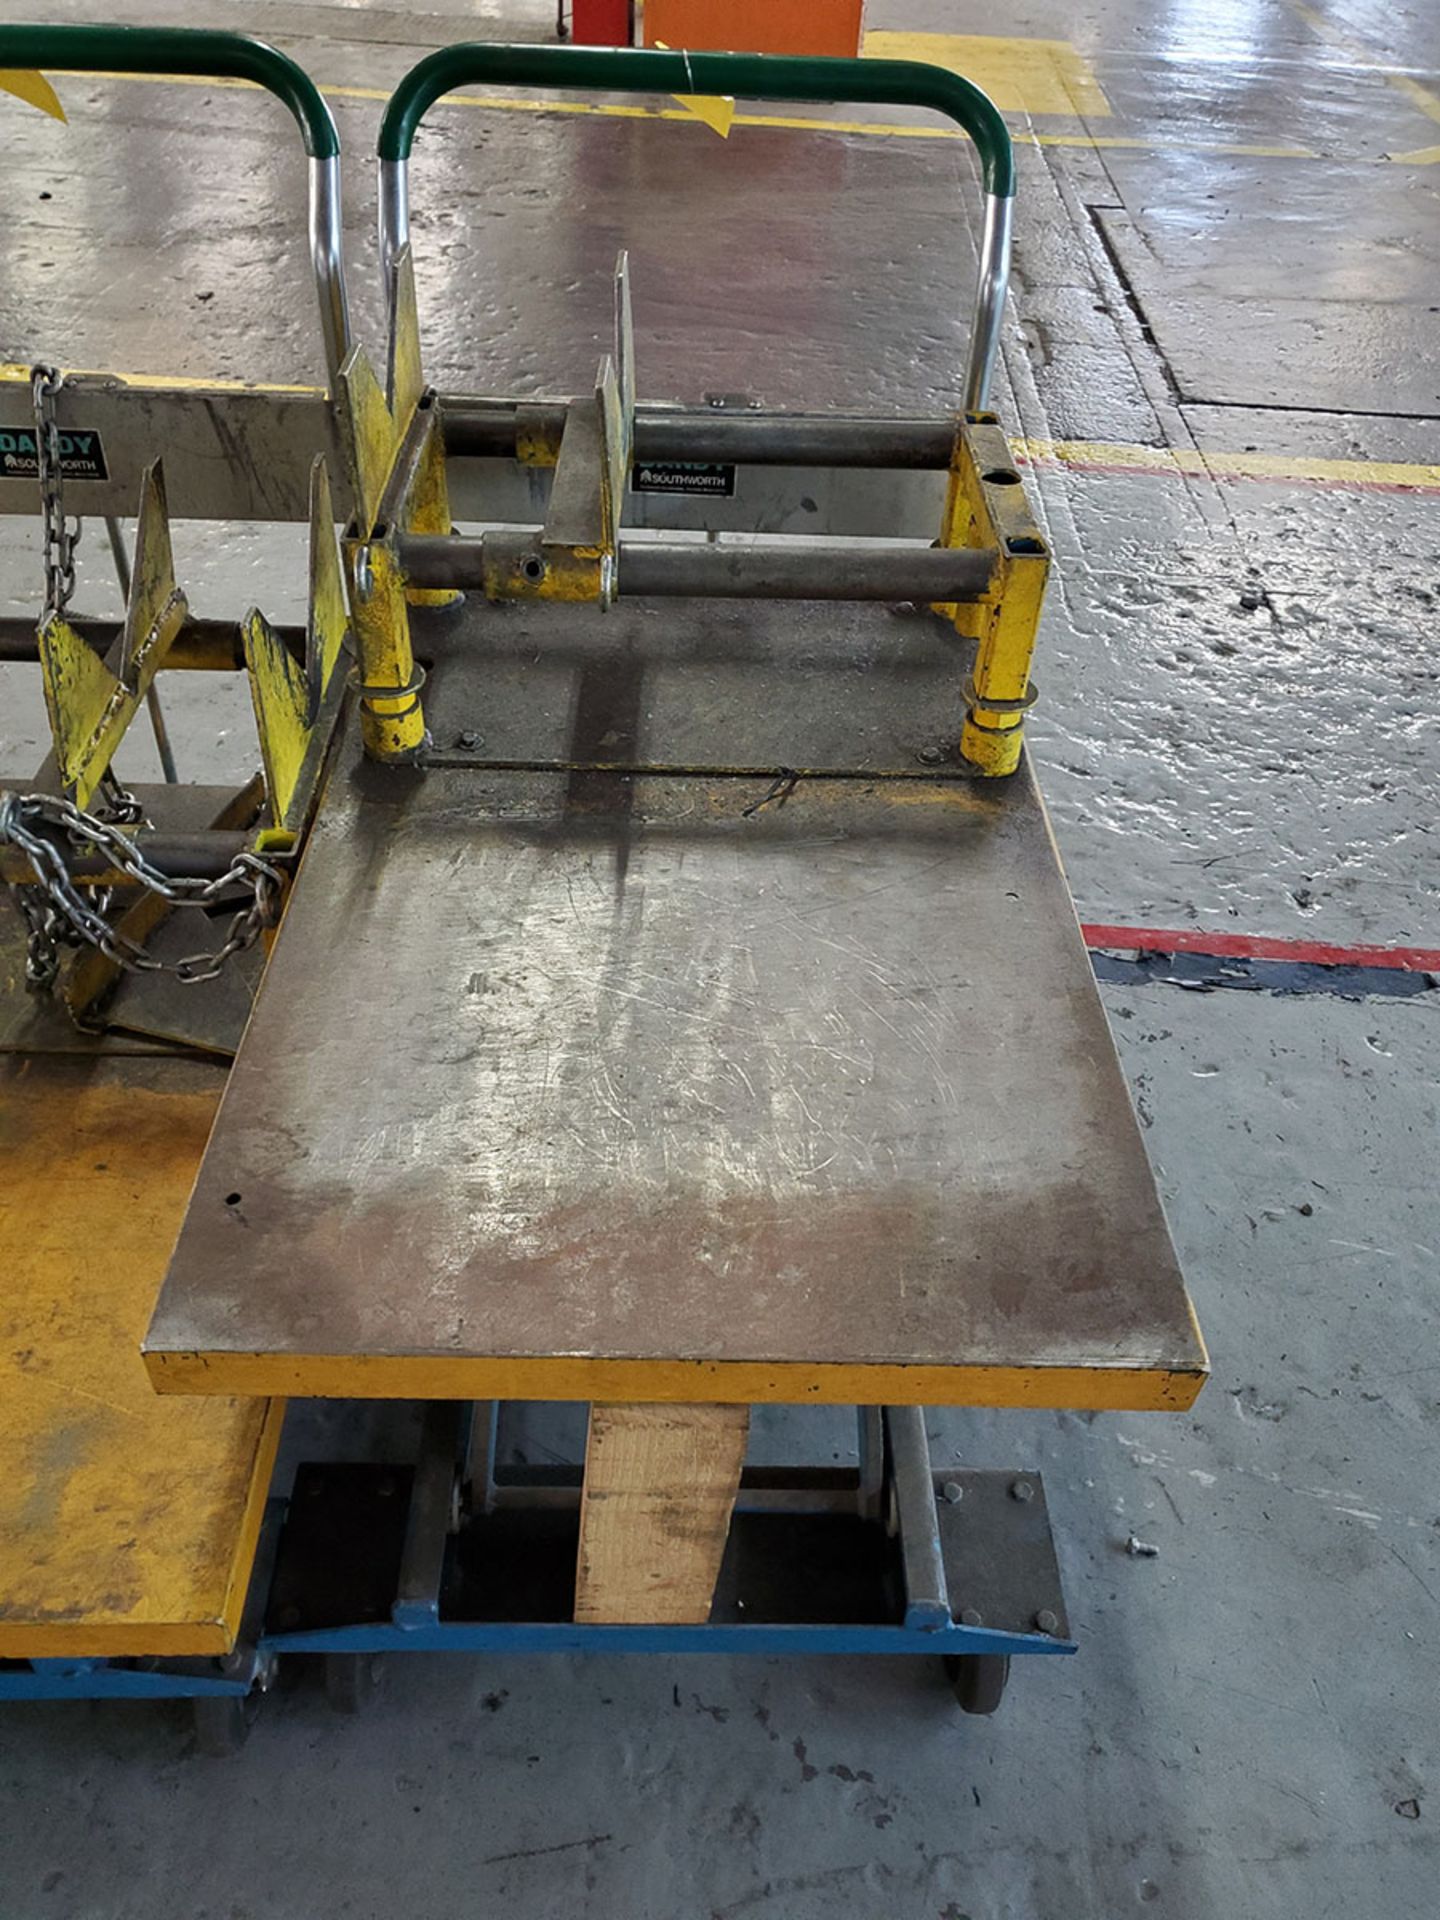 DANDY 1,100 LB. HYDRAULIC DIE LIFT CARTS WITH ADJUSTABLE SADDLE FIXTURES - Image 3 of 3